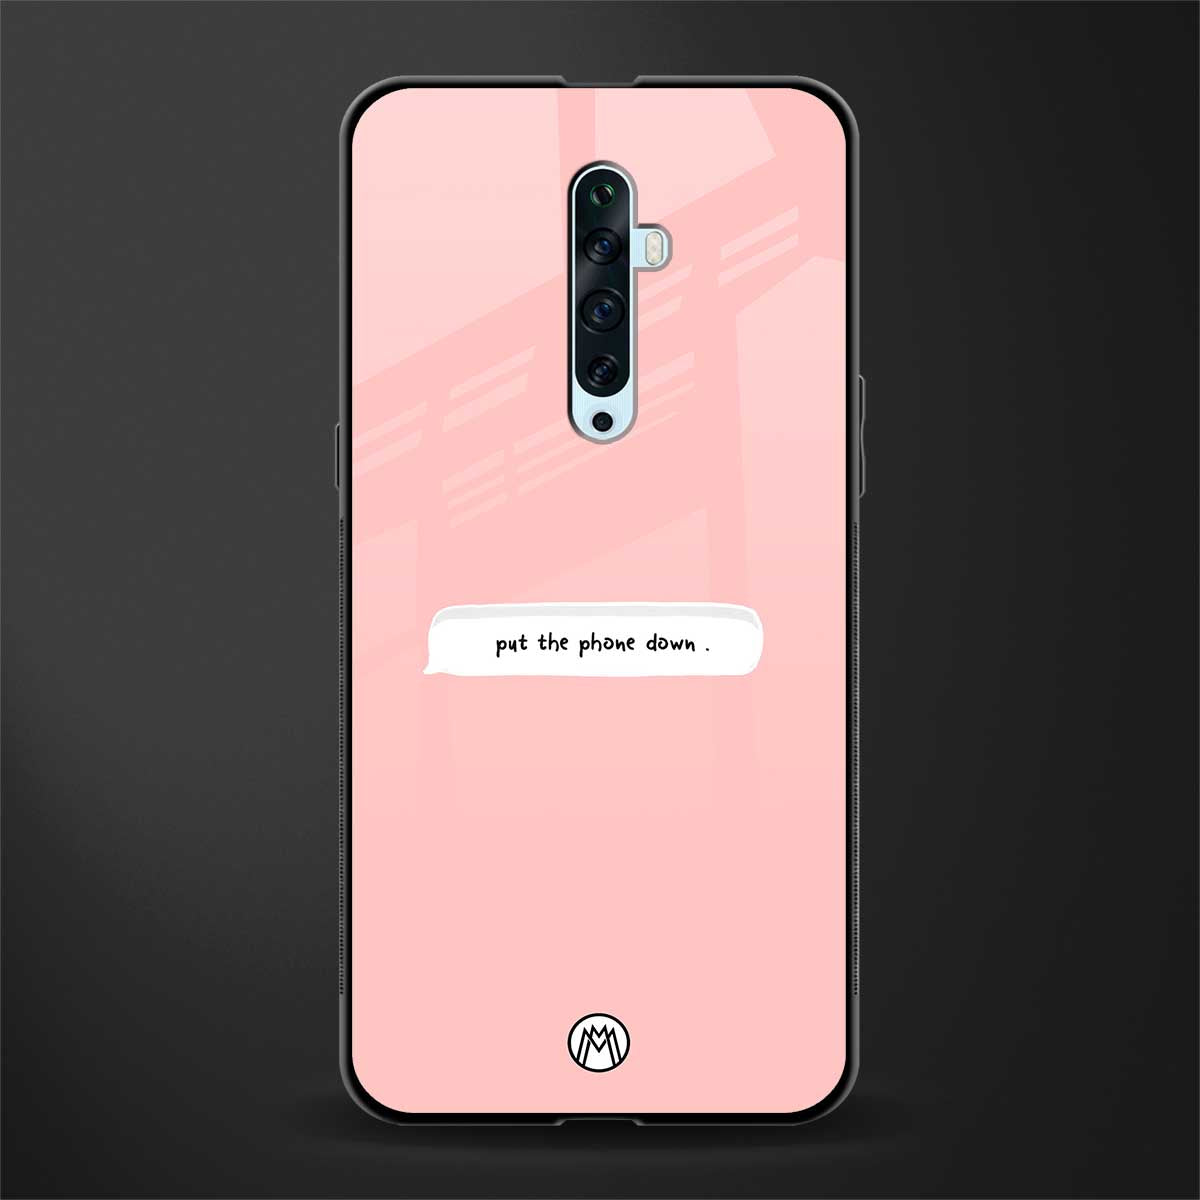 put the phone down glass case for oppo reno 2z image